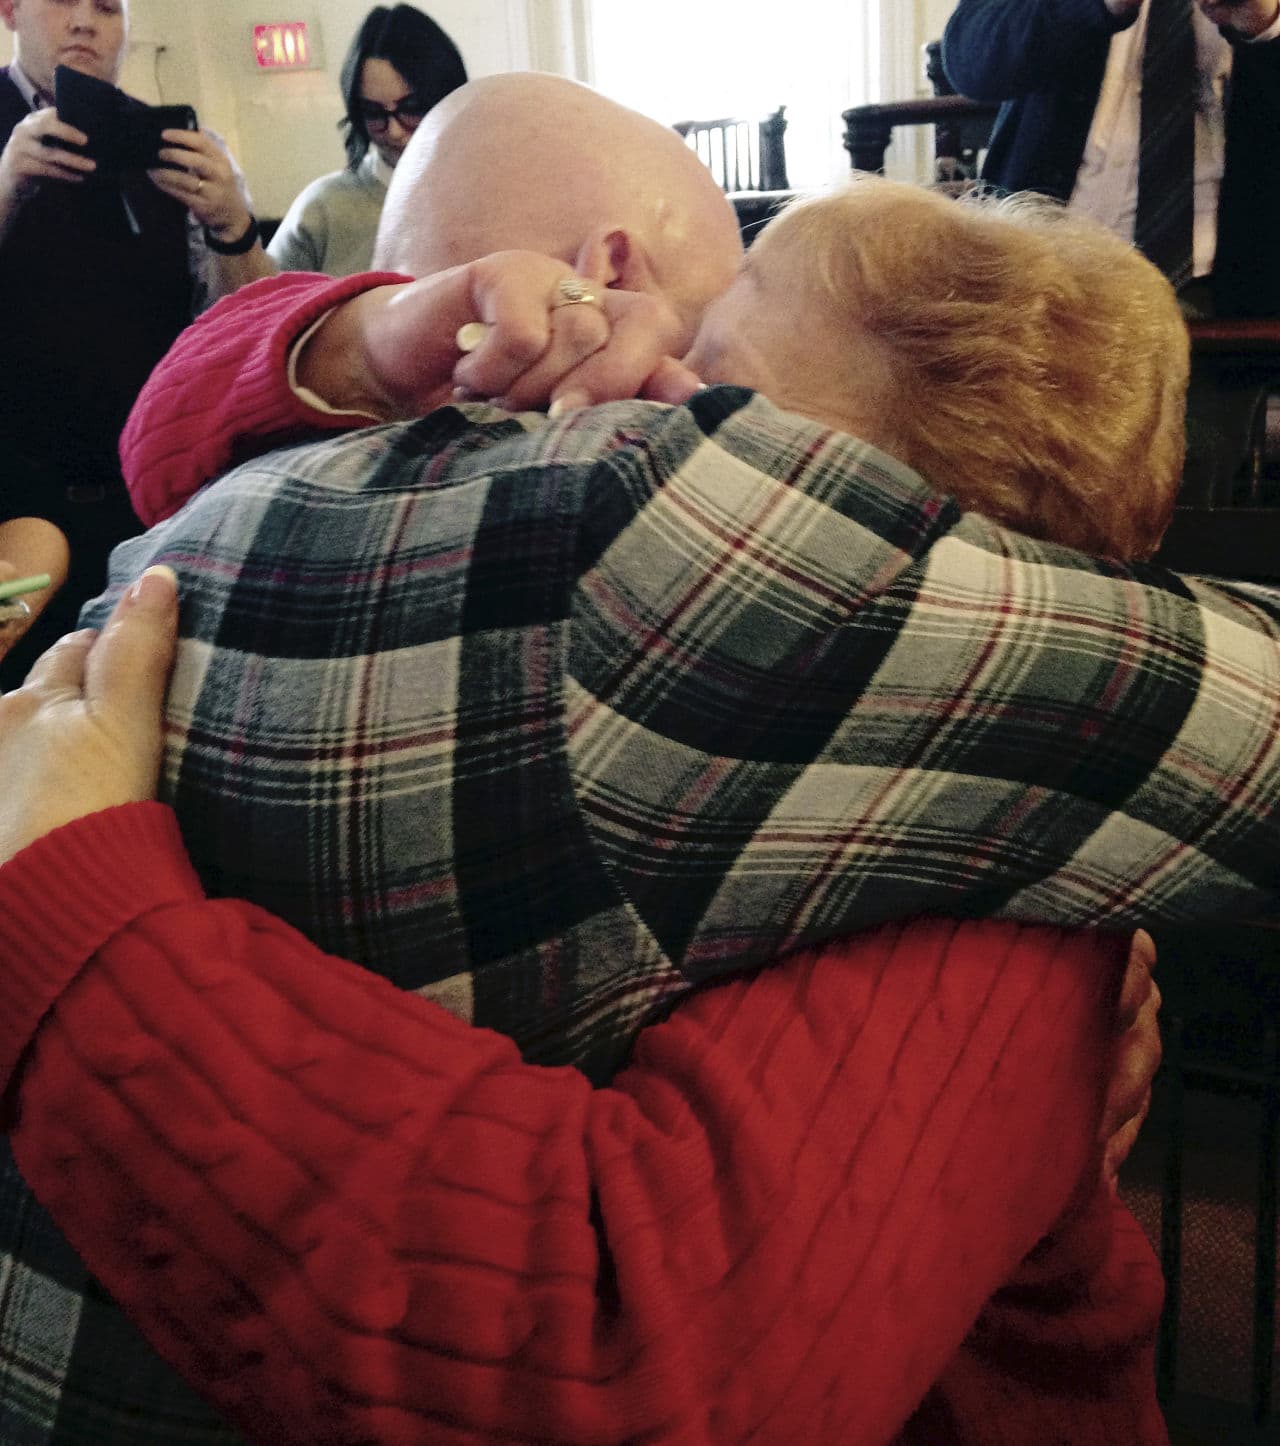 George Perrot, left, hugs his mother Beverly Garrant on Wednesday, after Judge Robert Kane ordered Perrot released from prison. (Denise Lavoie/AP)